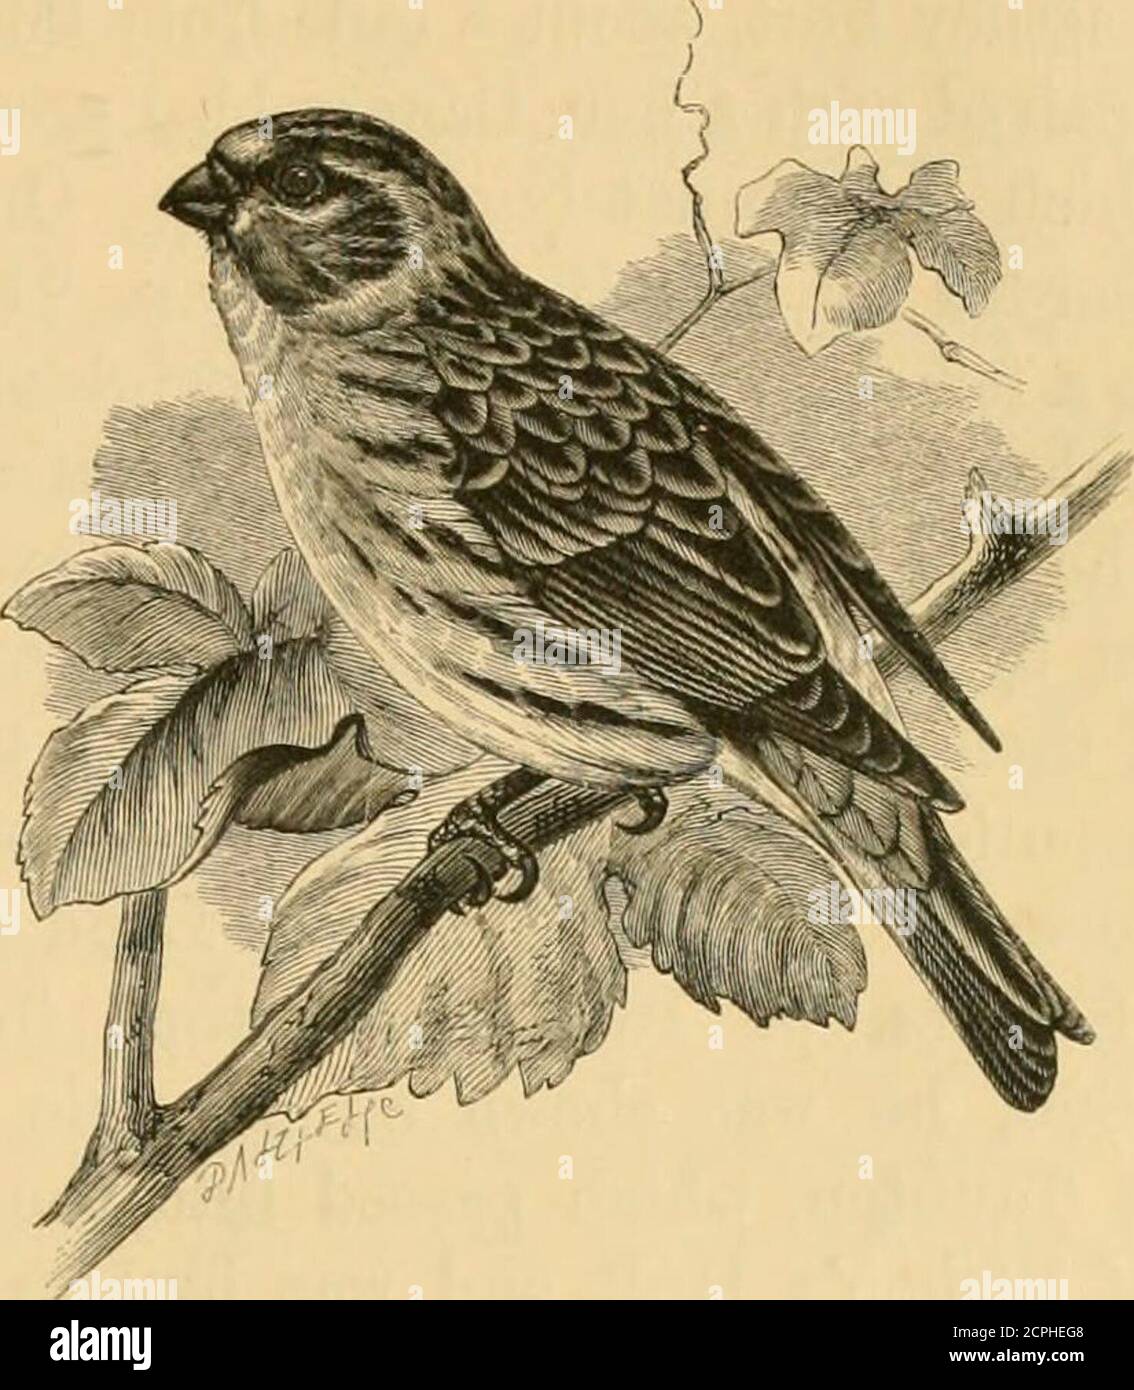 . A history of British birds . SERIN. PASSEBES. Ill FRINGILLID^.. Sekinus hortulanus, K. L. Koch*.THE SERIN. Serinus, K. L. Kochf.—Bill hard, strong, short, somewhat conical, but verybroad at the base and with the distal half suddenly diminishing to the tip ;mandibles nearly equal in size, but the upper a little longer than the lower ;edges plain. Nostrils basal, supernal, round and hidden by projecting andrecurved frontal plumes. Gape straight. Wings with the first primary so smallas to seem wanting ; the second, third and fourth nearly equal, but the thirda trifle the longest—none of them ho Stock Photo